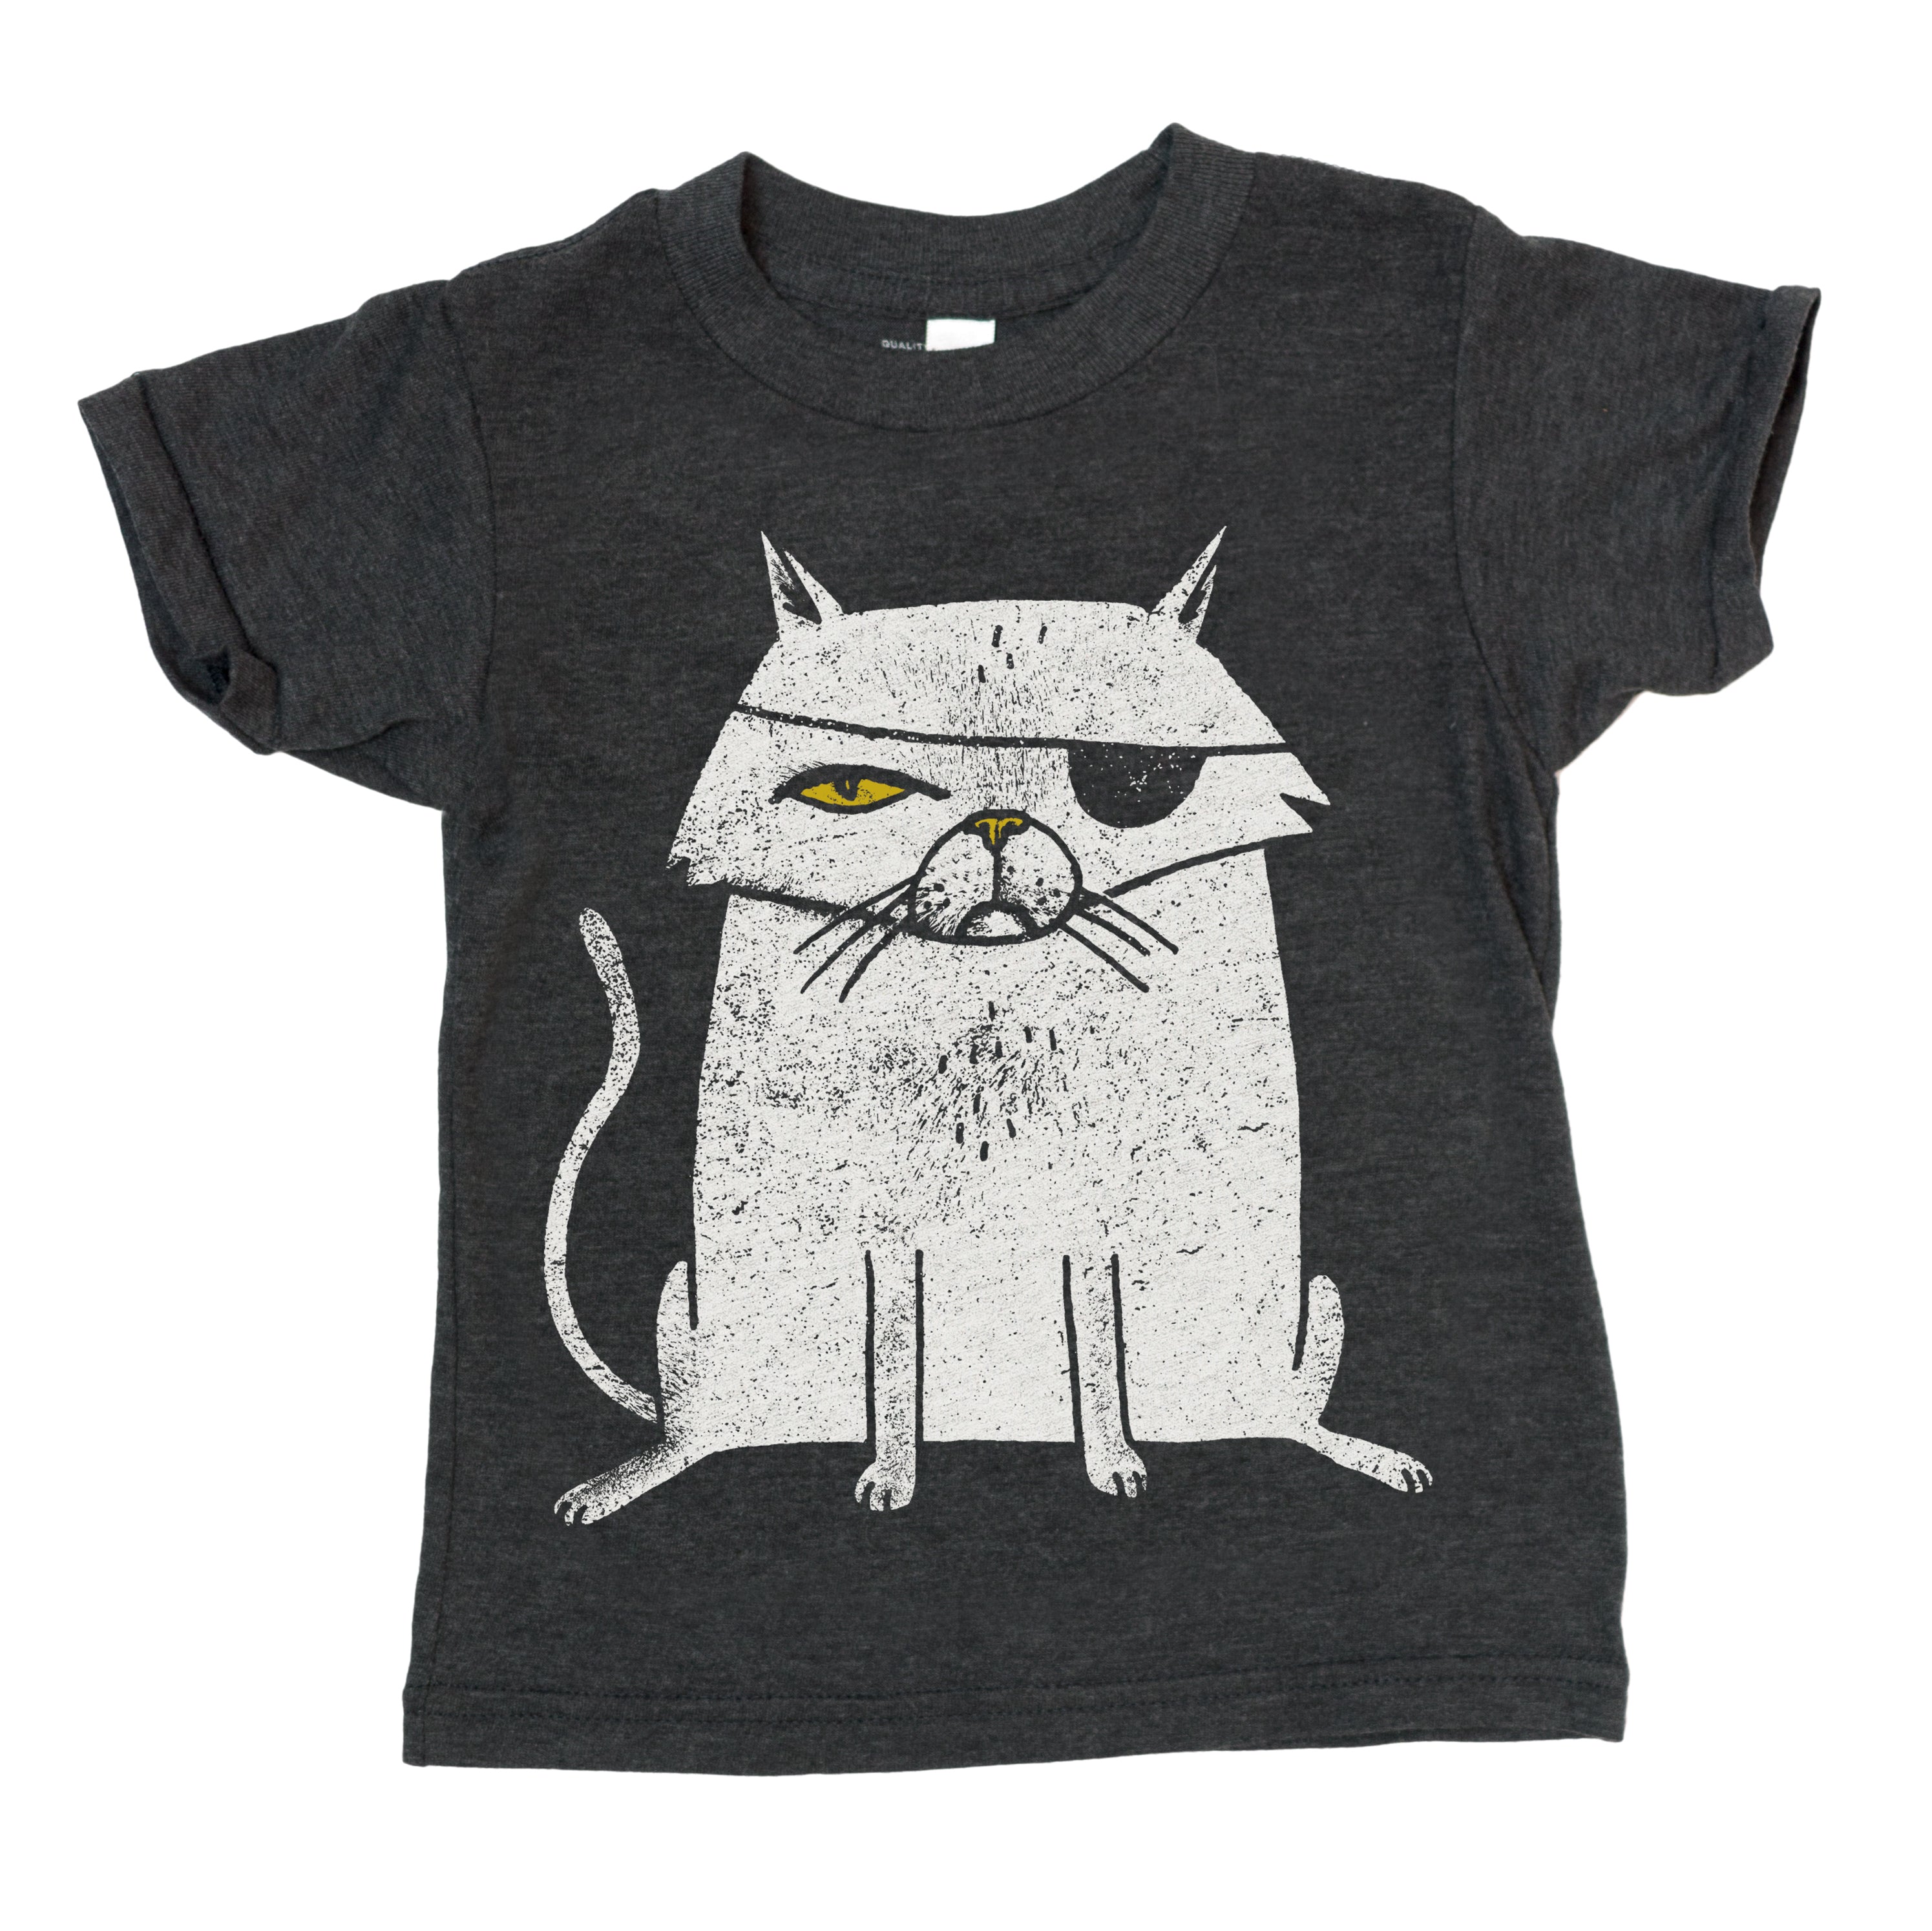 Super soft gray kids/infant graphic tshirt of a one eyed cat with an eyepatch. The cat looks like a pirate or an evil Bond villian. Factory 43 is a graphic design studio that makes art with a PNW vibe that reflects their Midwest/Southern roots. This cotton/polyester/rayon shirt printed in Seattle, Washington. The cat is white with a yellow eye and nose.